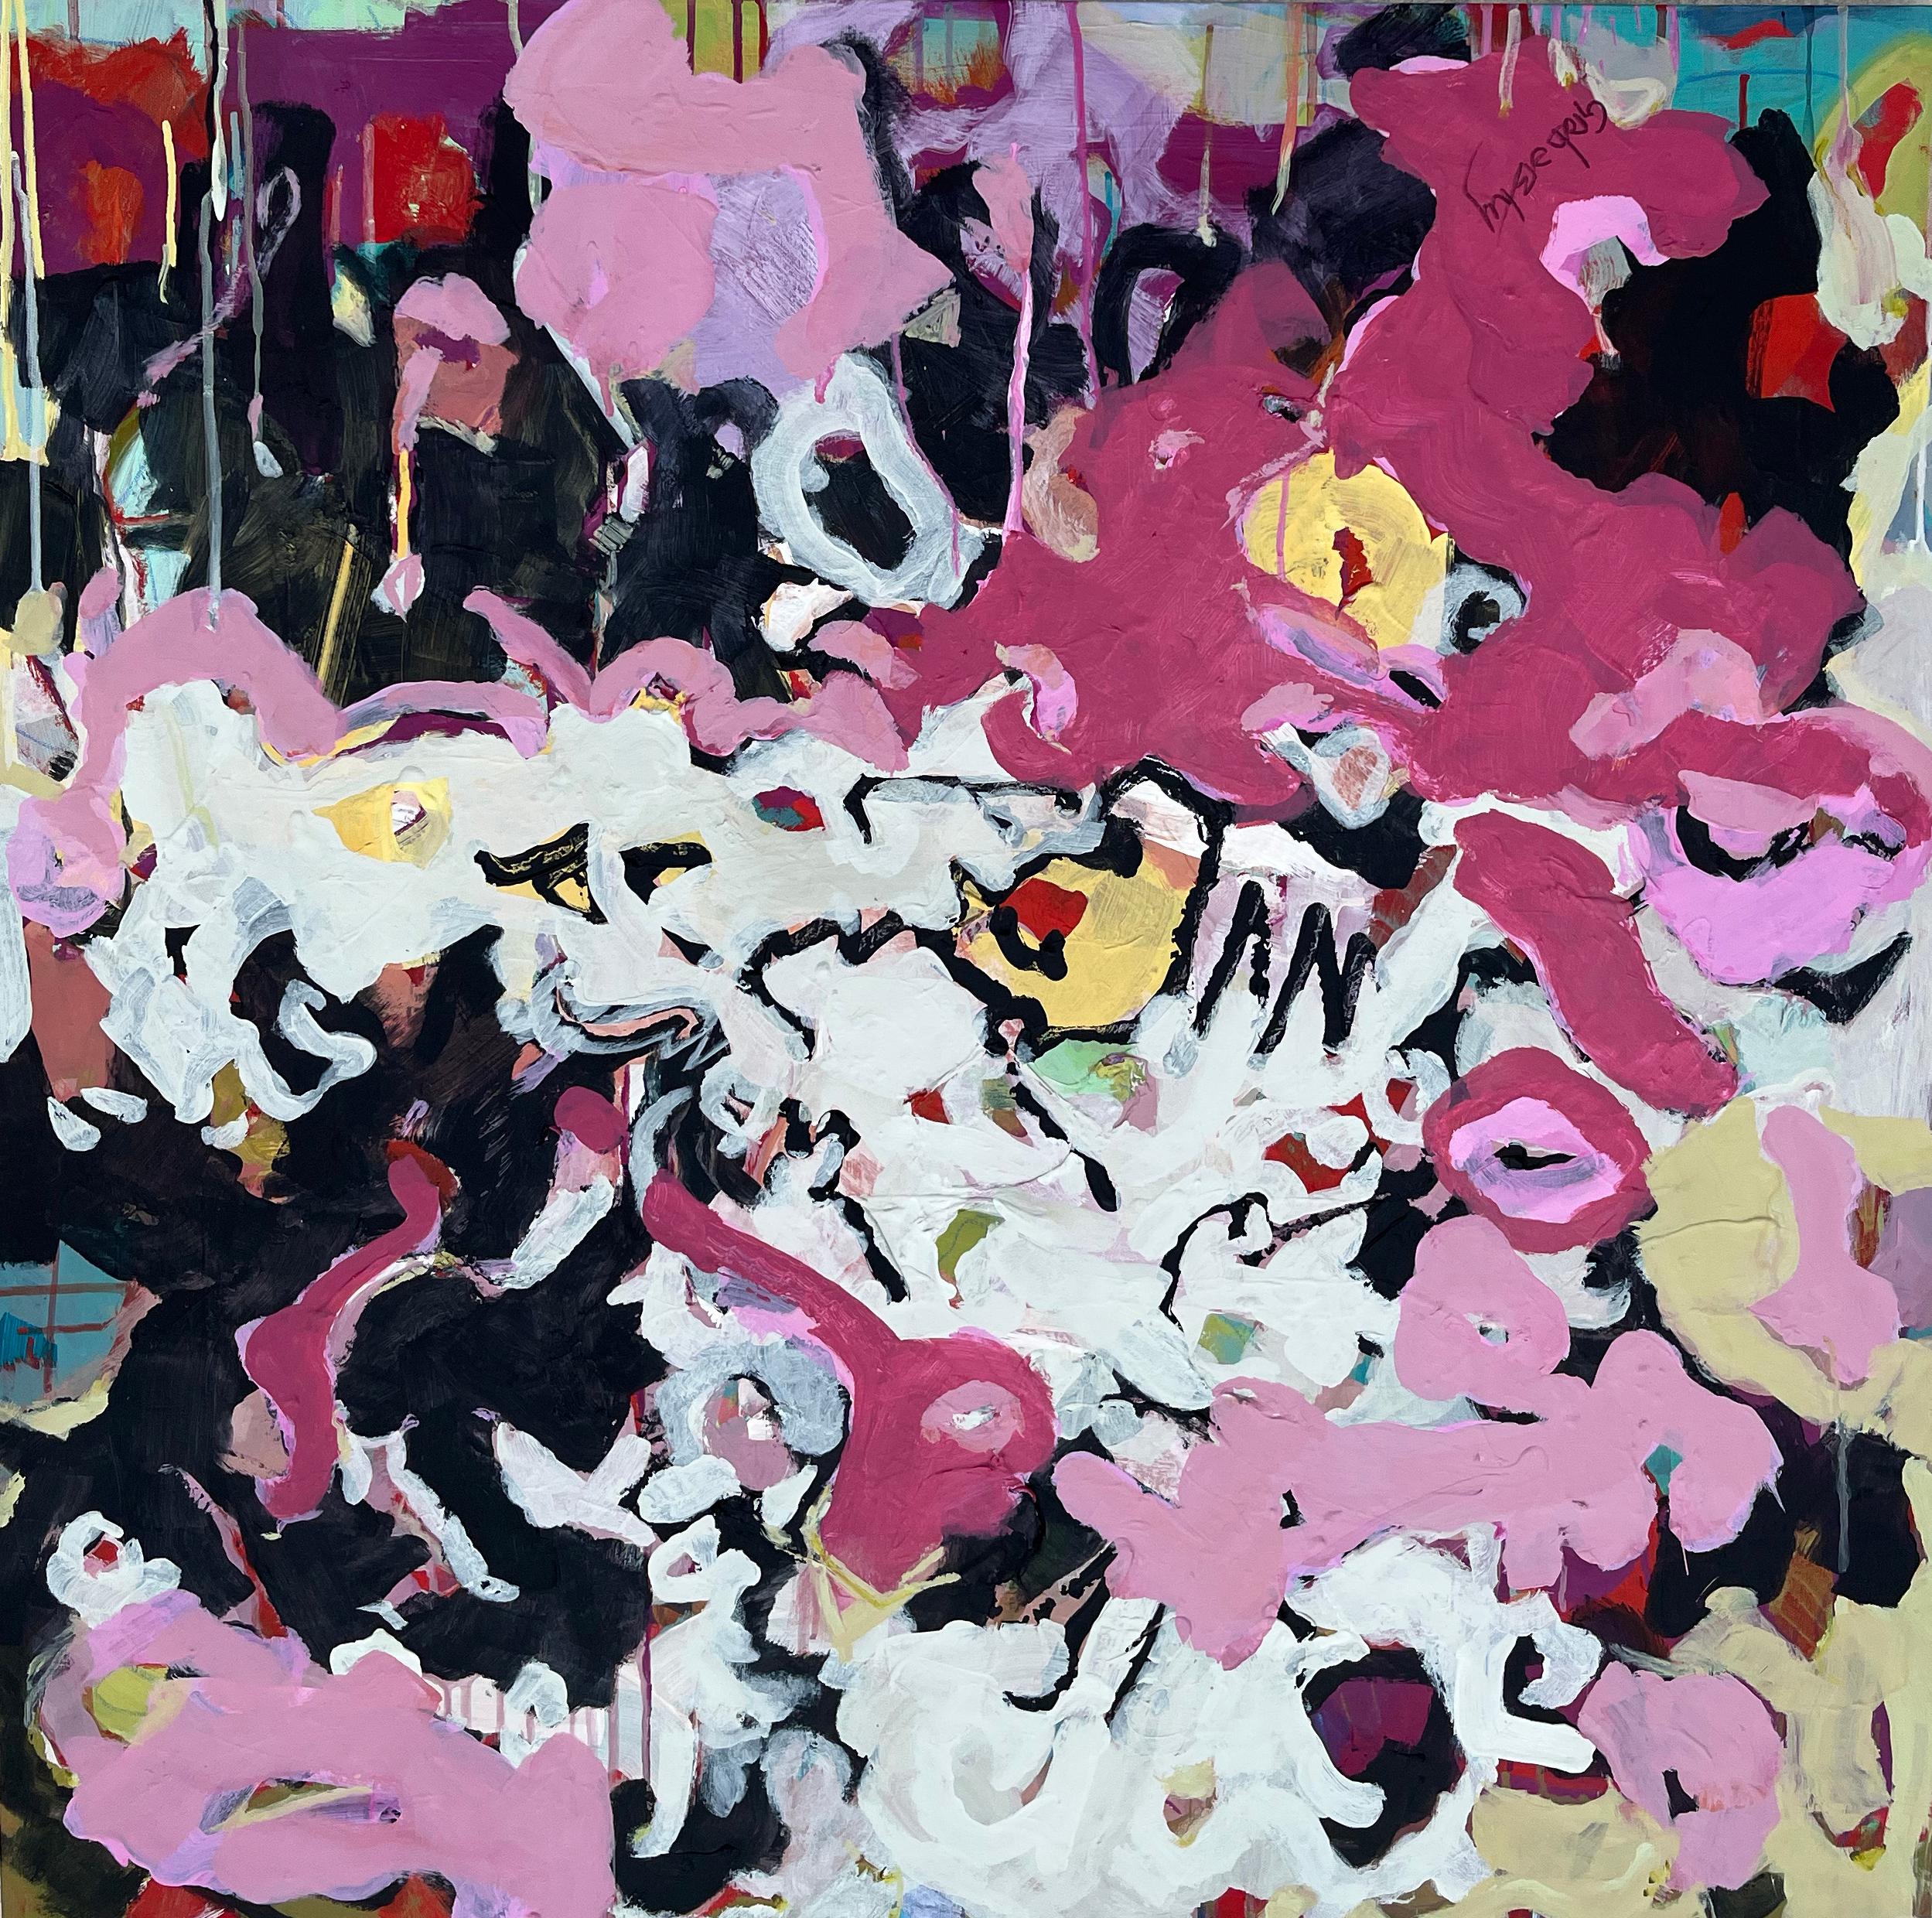 <p>Artist Comments<br>Artist Sheila Grabarsky expresses abstract structures and linework in vibrant shades of magenta. The work exudes the joy the artist felt upon receiving the slip releasing her from her day job. She paints with articulate vigor,